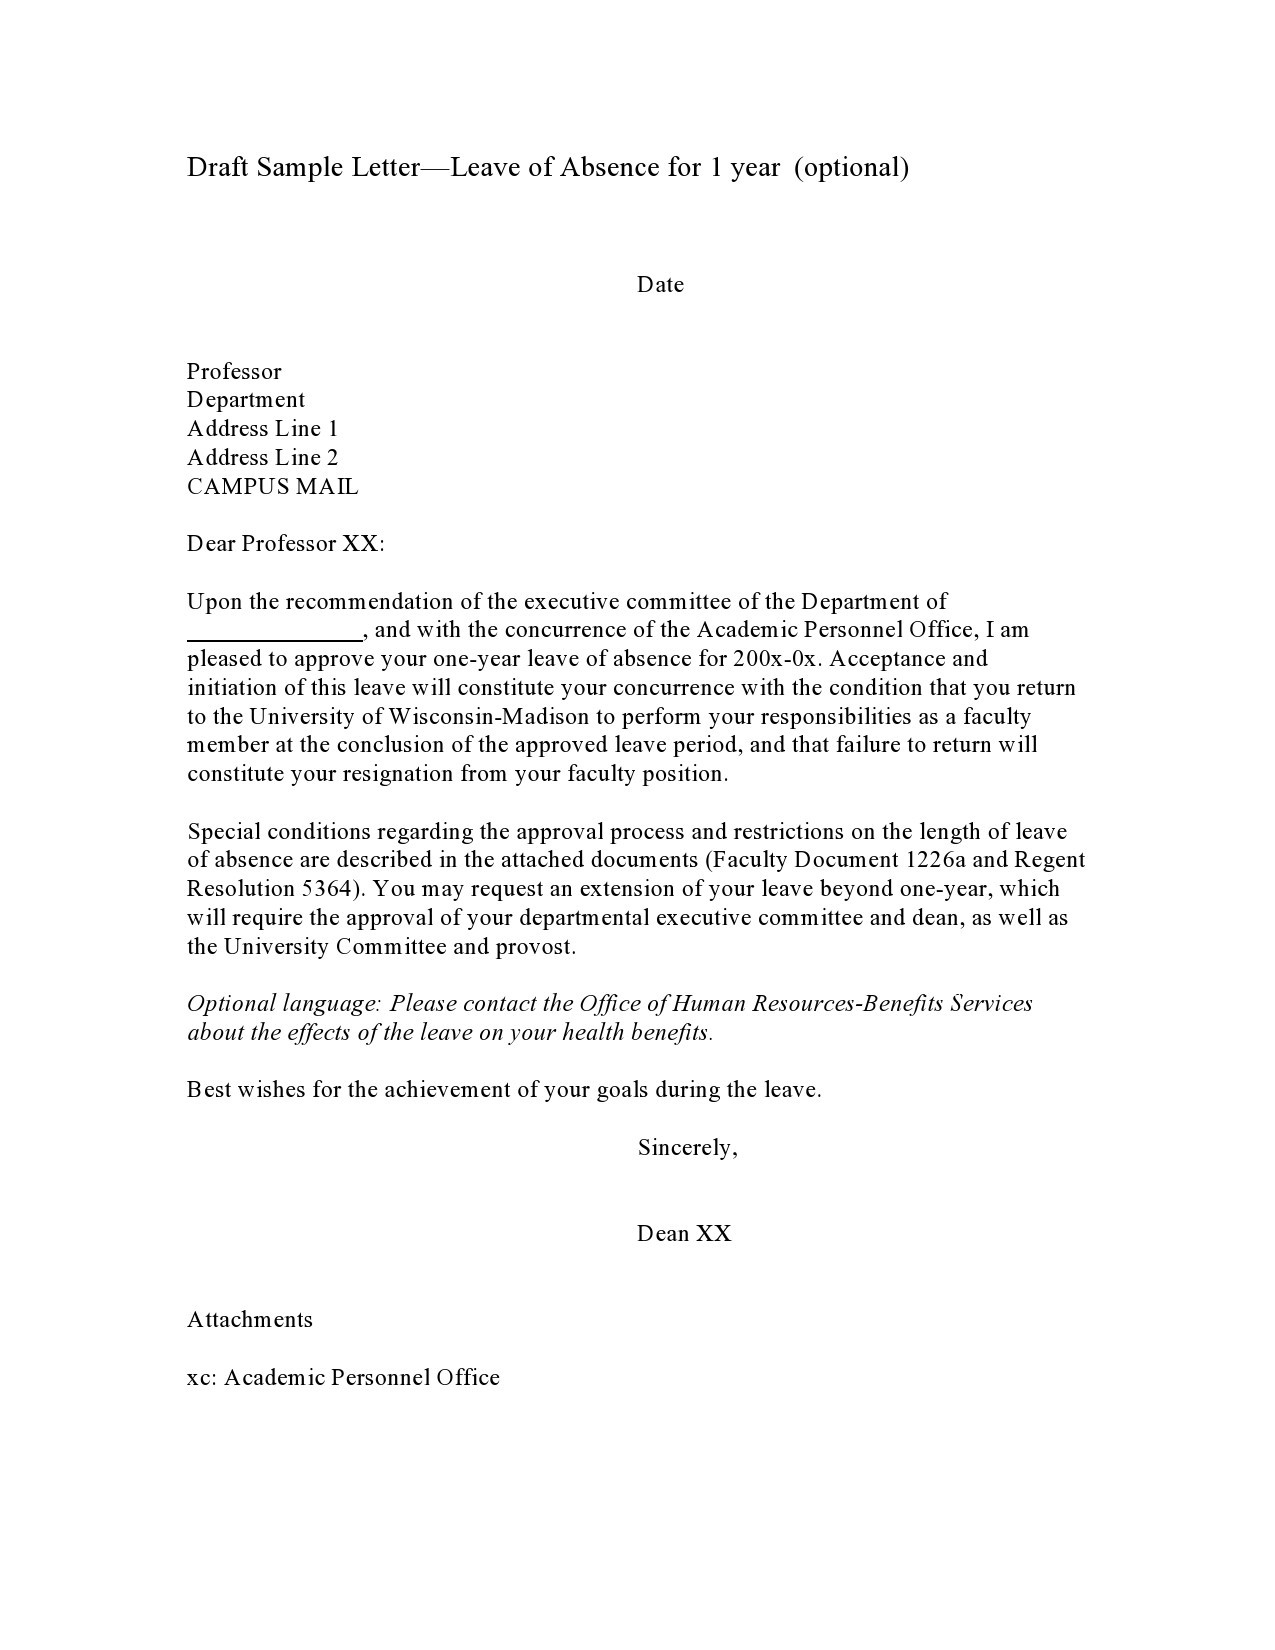 Free leave of absence letter 01